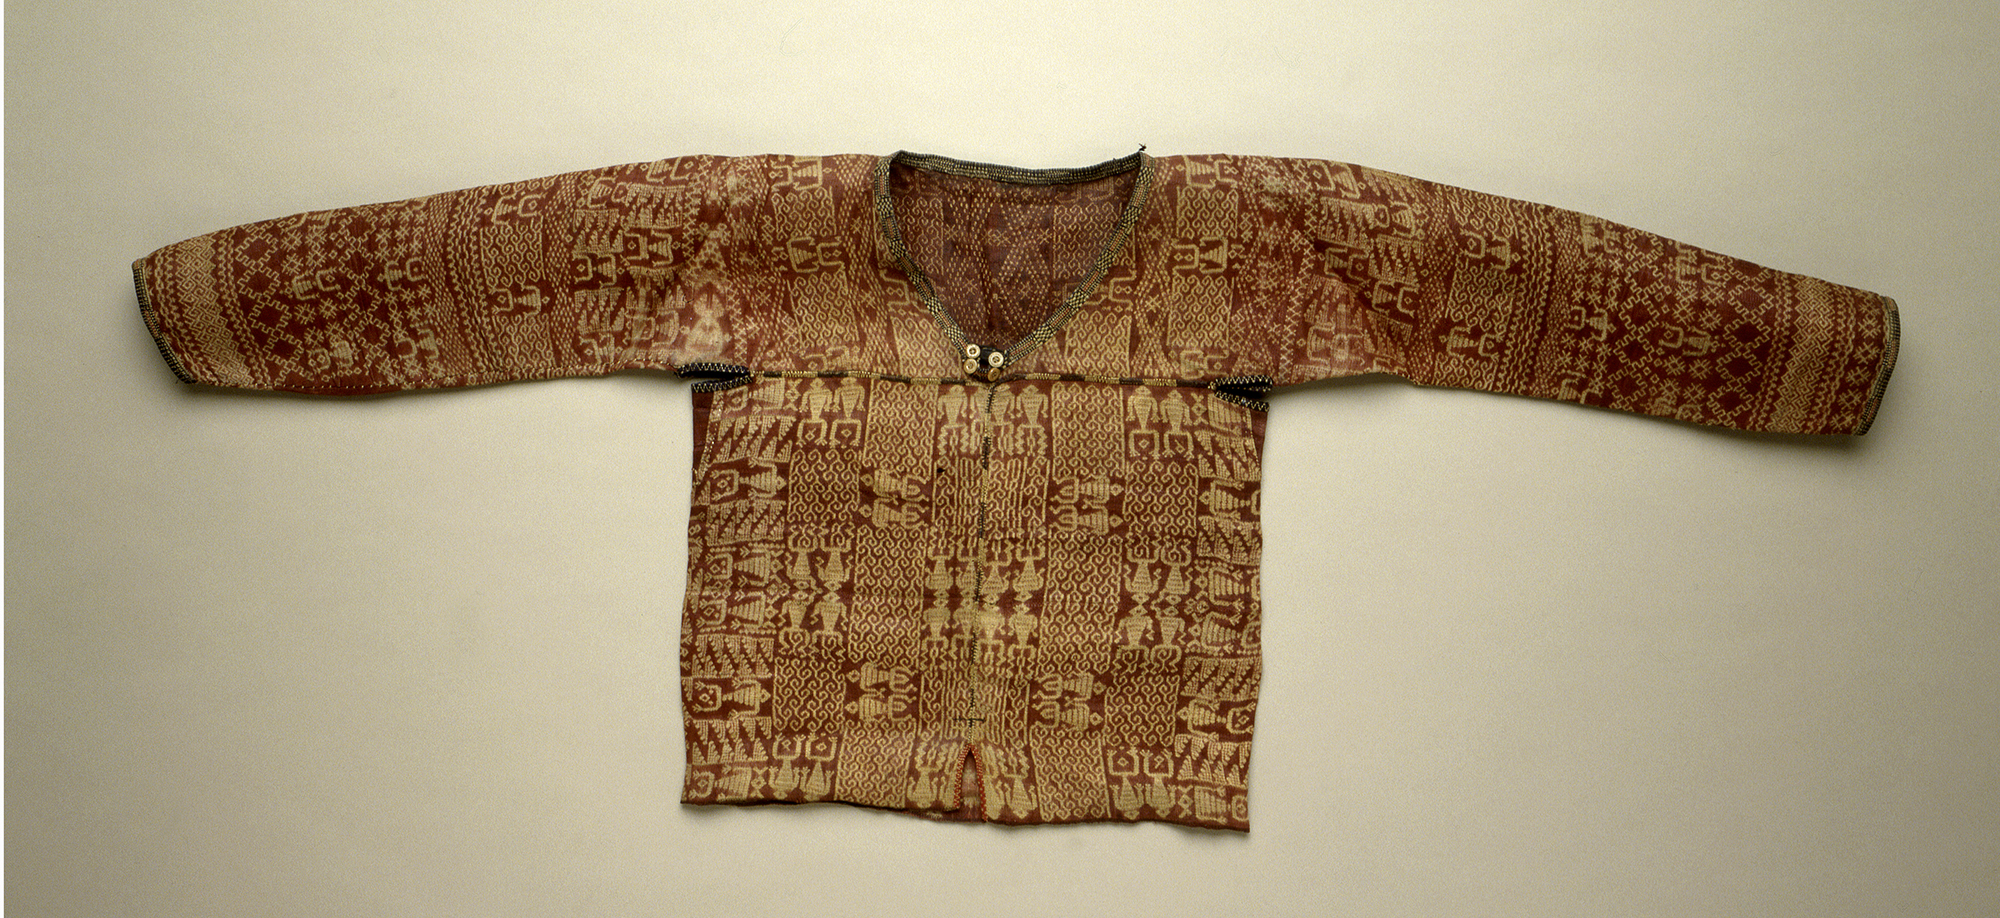 Kulaman abaca tritik shirt for mabolot war leader.  One loom narrow width of cloth forms the lower part of the bodice, separate pieces form the shoulders and sleeves. Larger garment can be made for a man. 